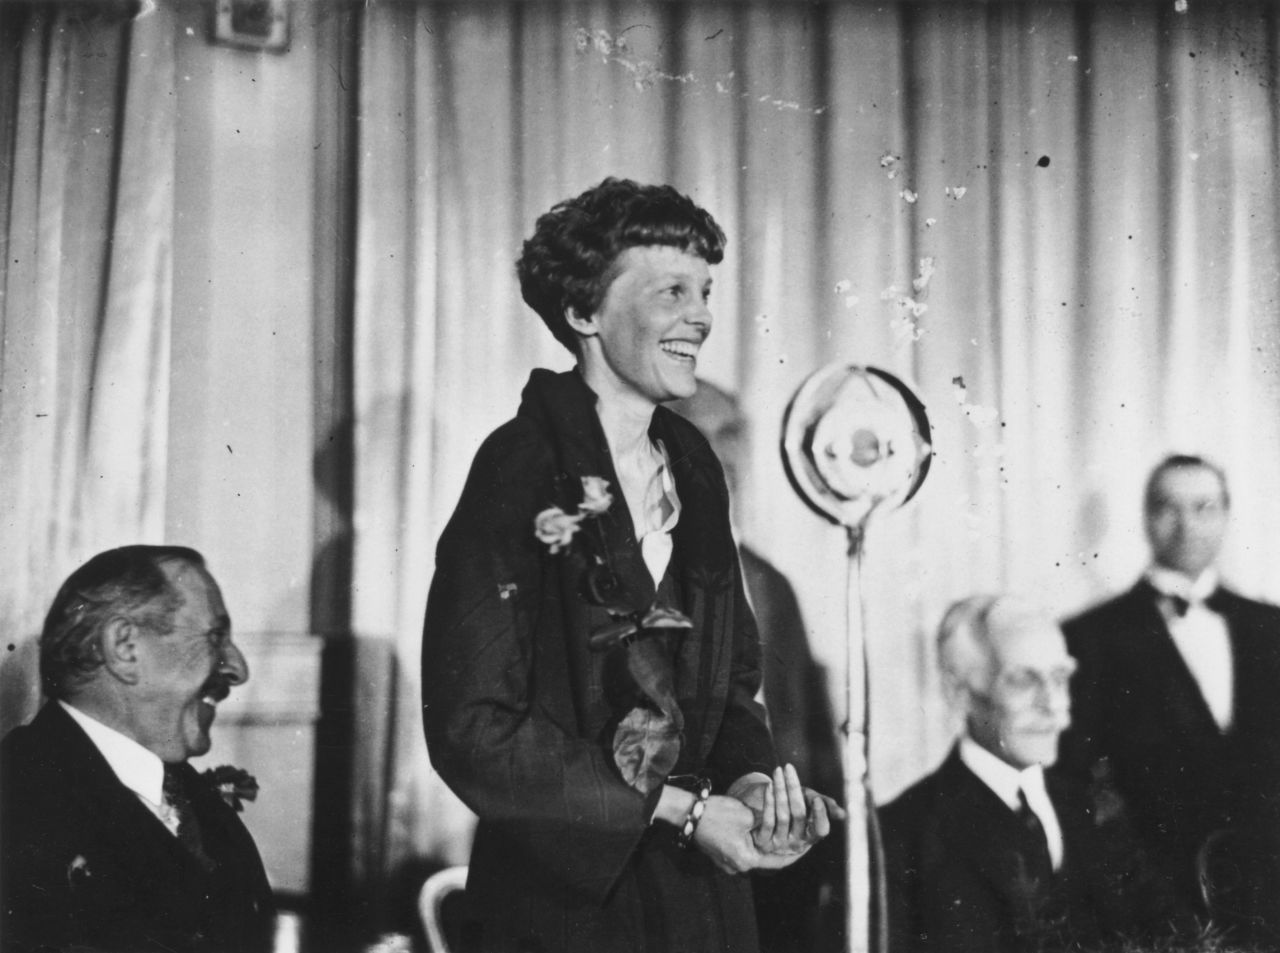 Earhart addresses journalists during a lunch in London on May 23, 1932. Her triumphant crossing was not without difficulties. Shortly after taking off from Newfoundland, she encountered thick clouds and ice on the wings of her plane. Mechanical problems later in the flight informed her decision to land in Northern Ireland.